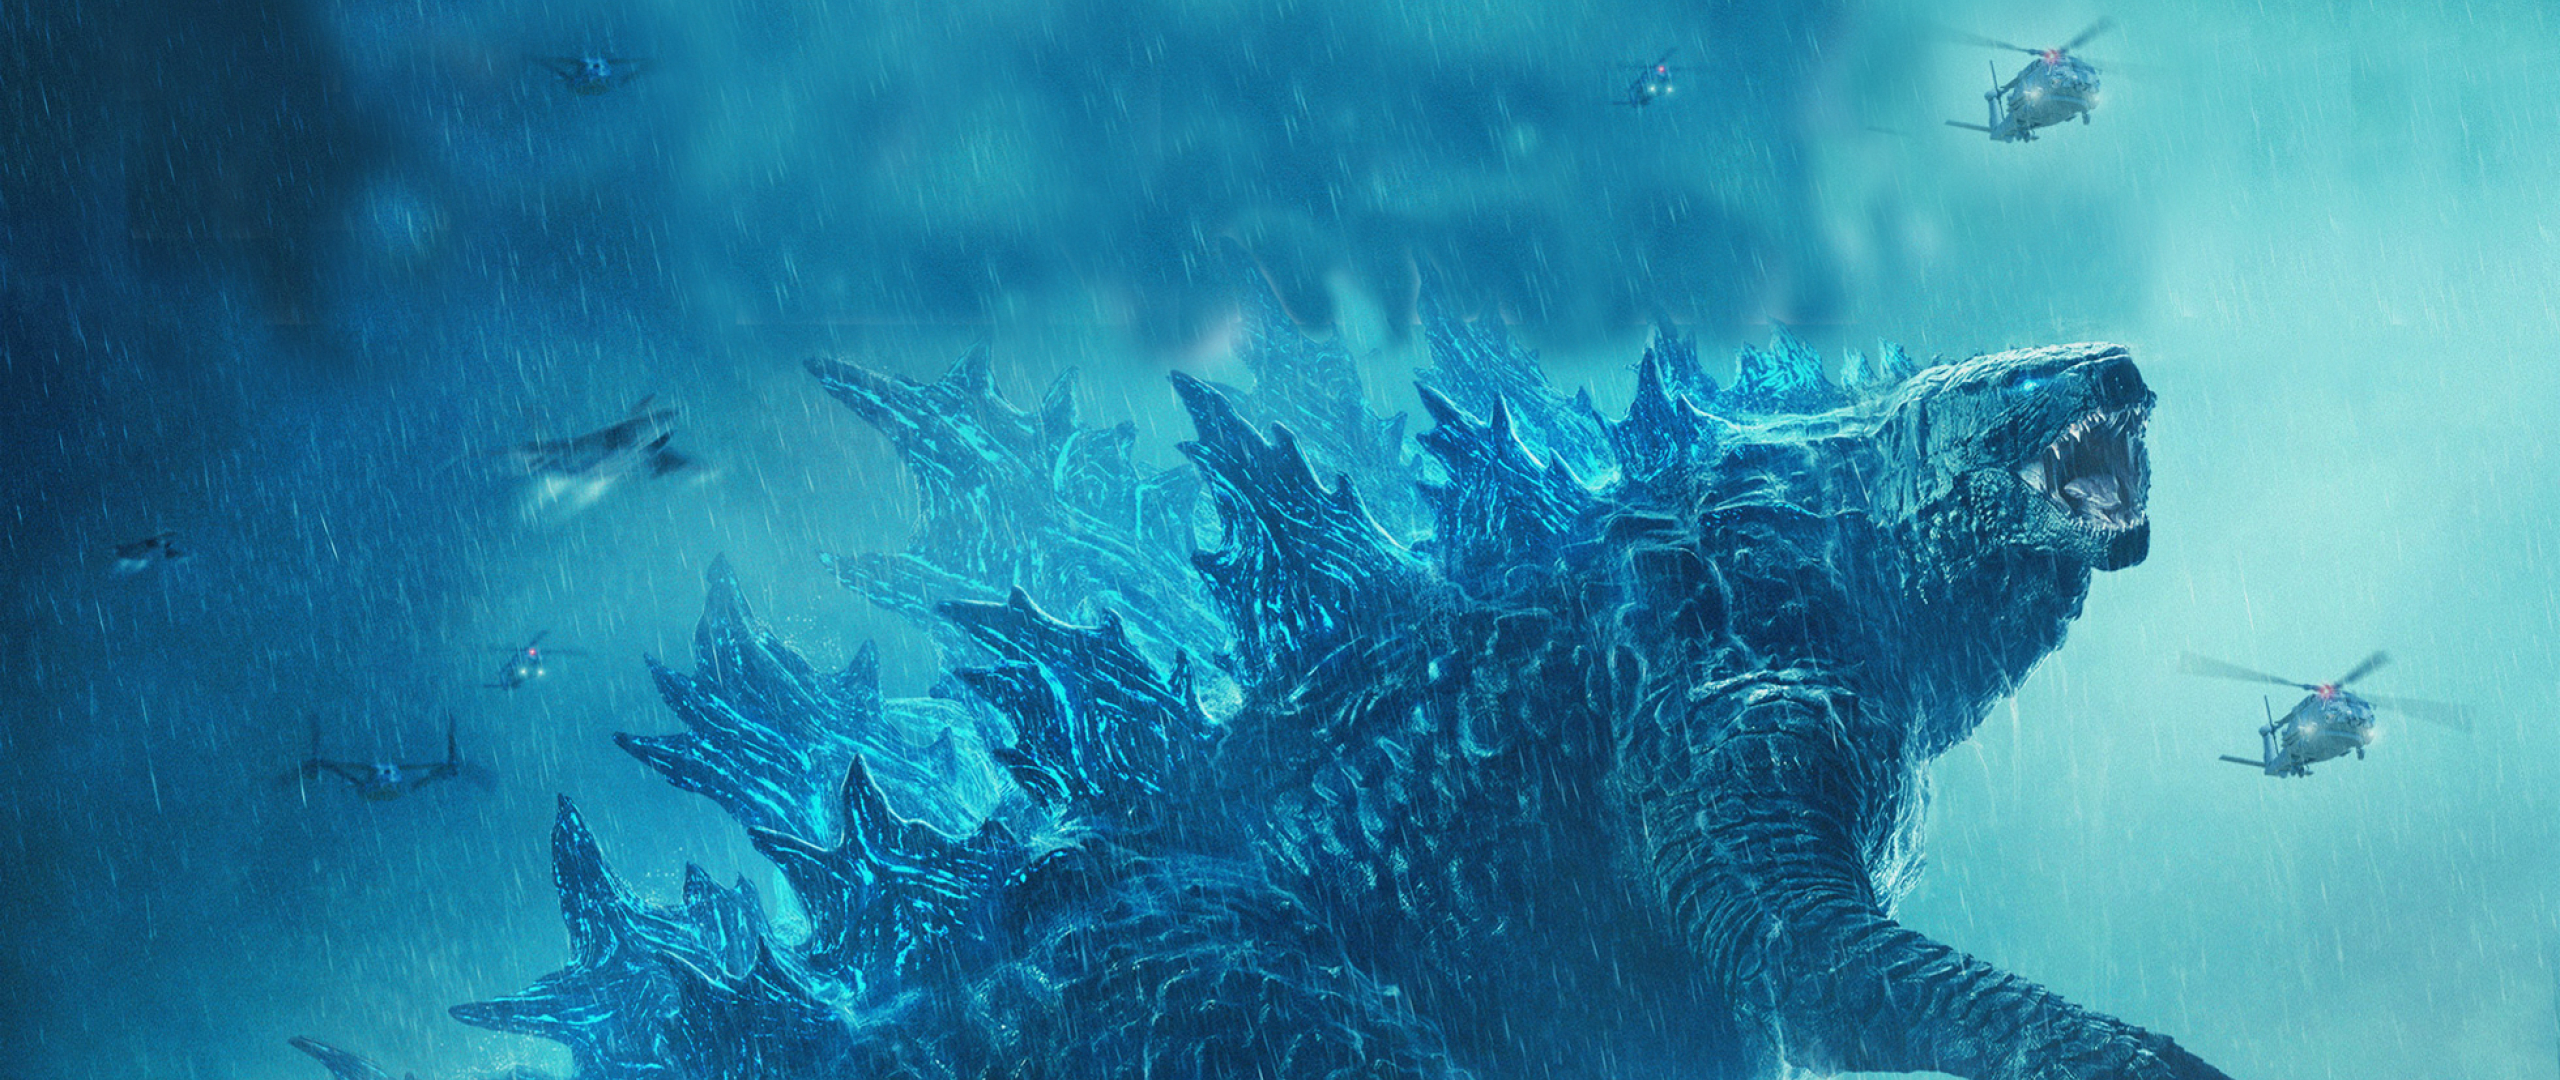 2560x1080 Godzilla 19 2560x1080 Resolution Wallpaper Hd Movies 4k Wallpapers Images Photos And Background